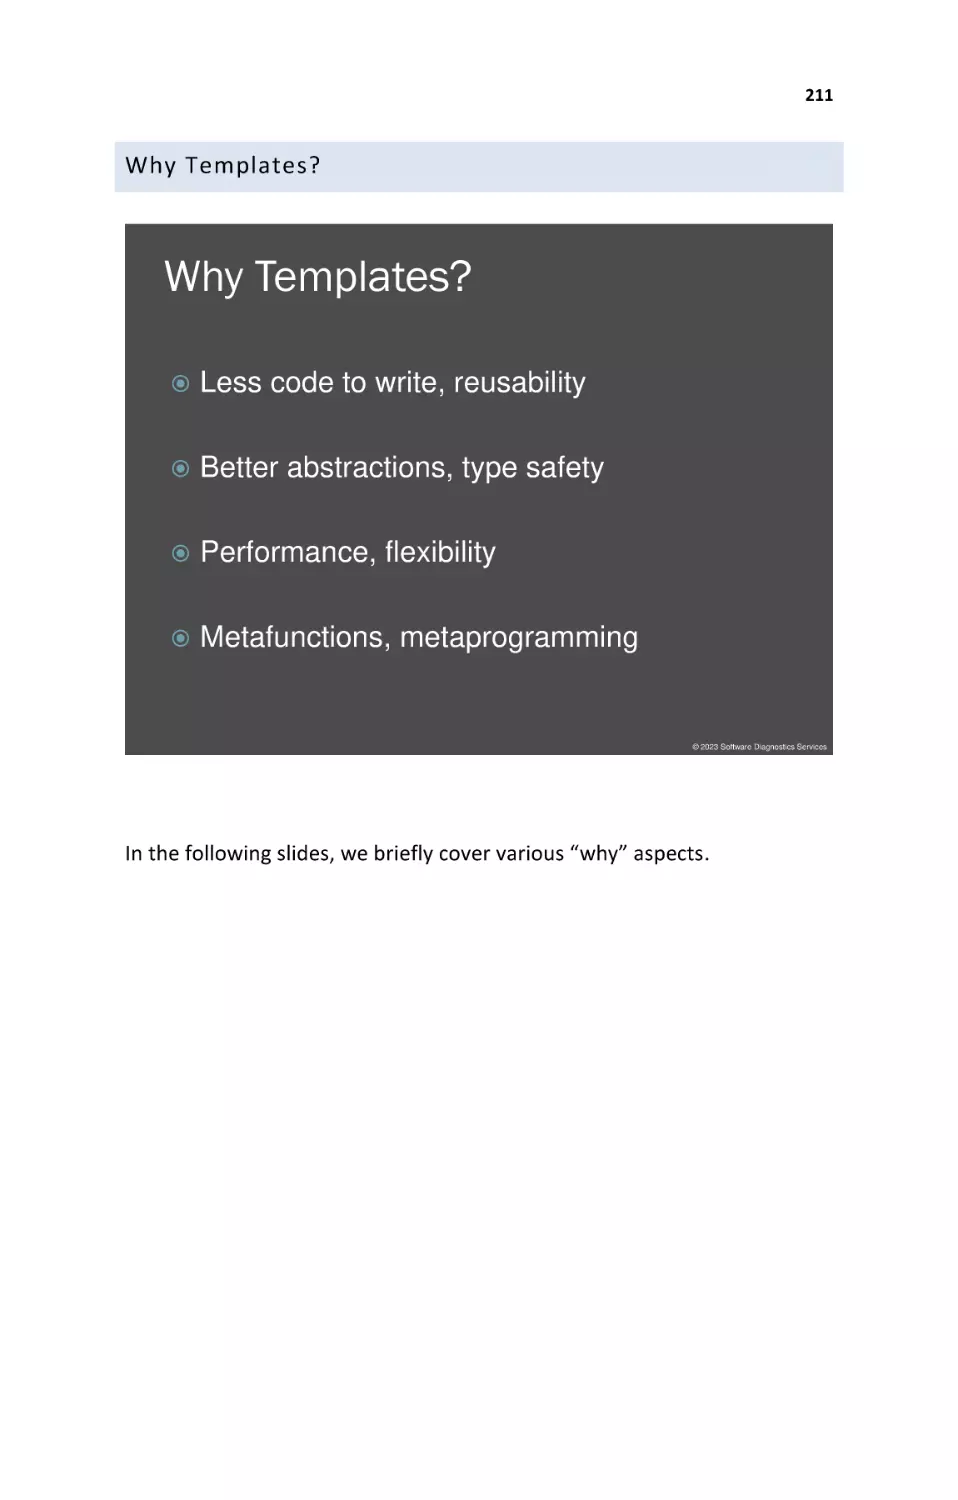 Why Templates?